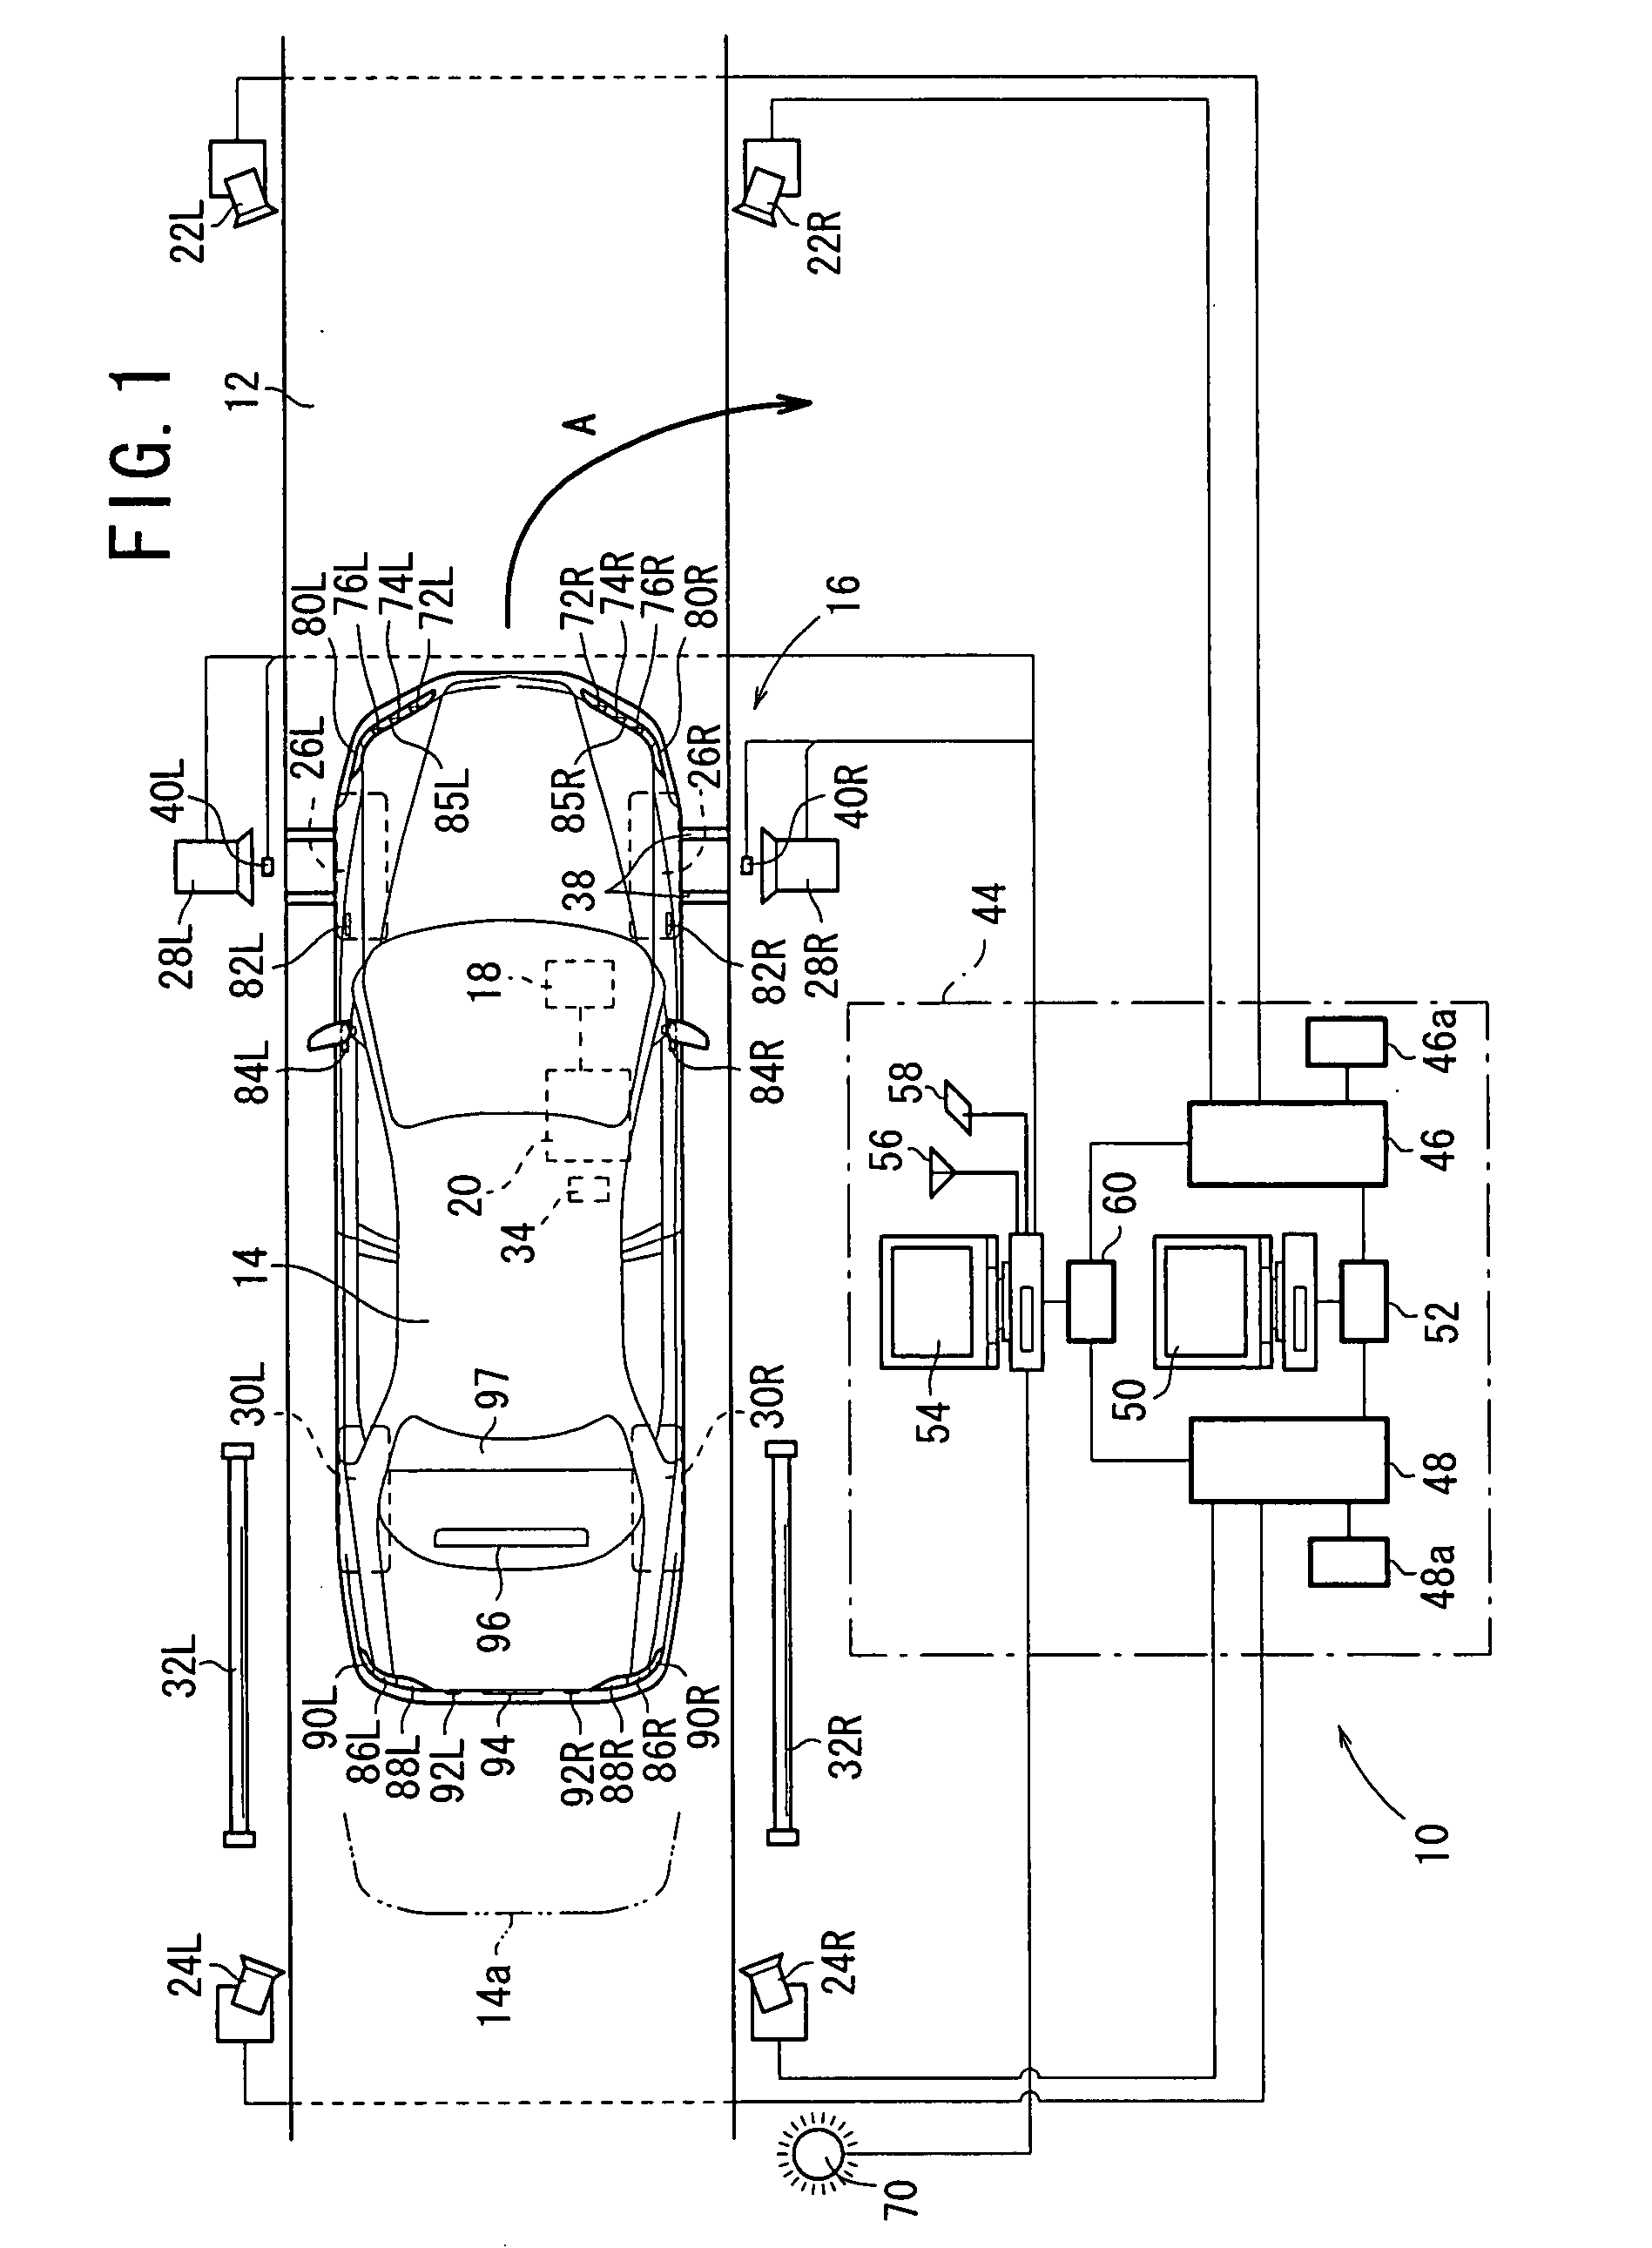 Vehicle Lamp Inspection Equipment and Inspection Method